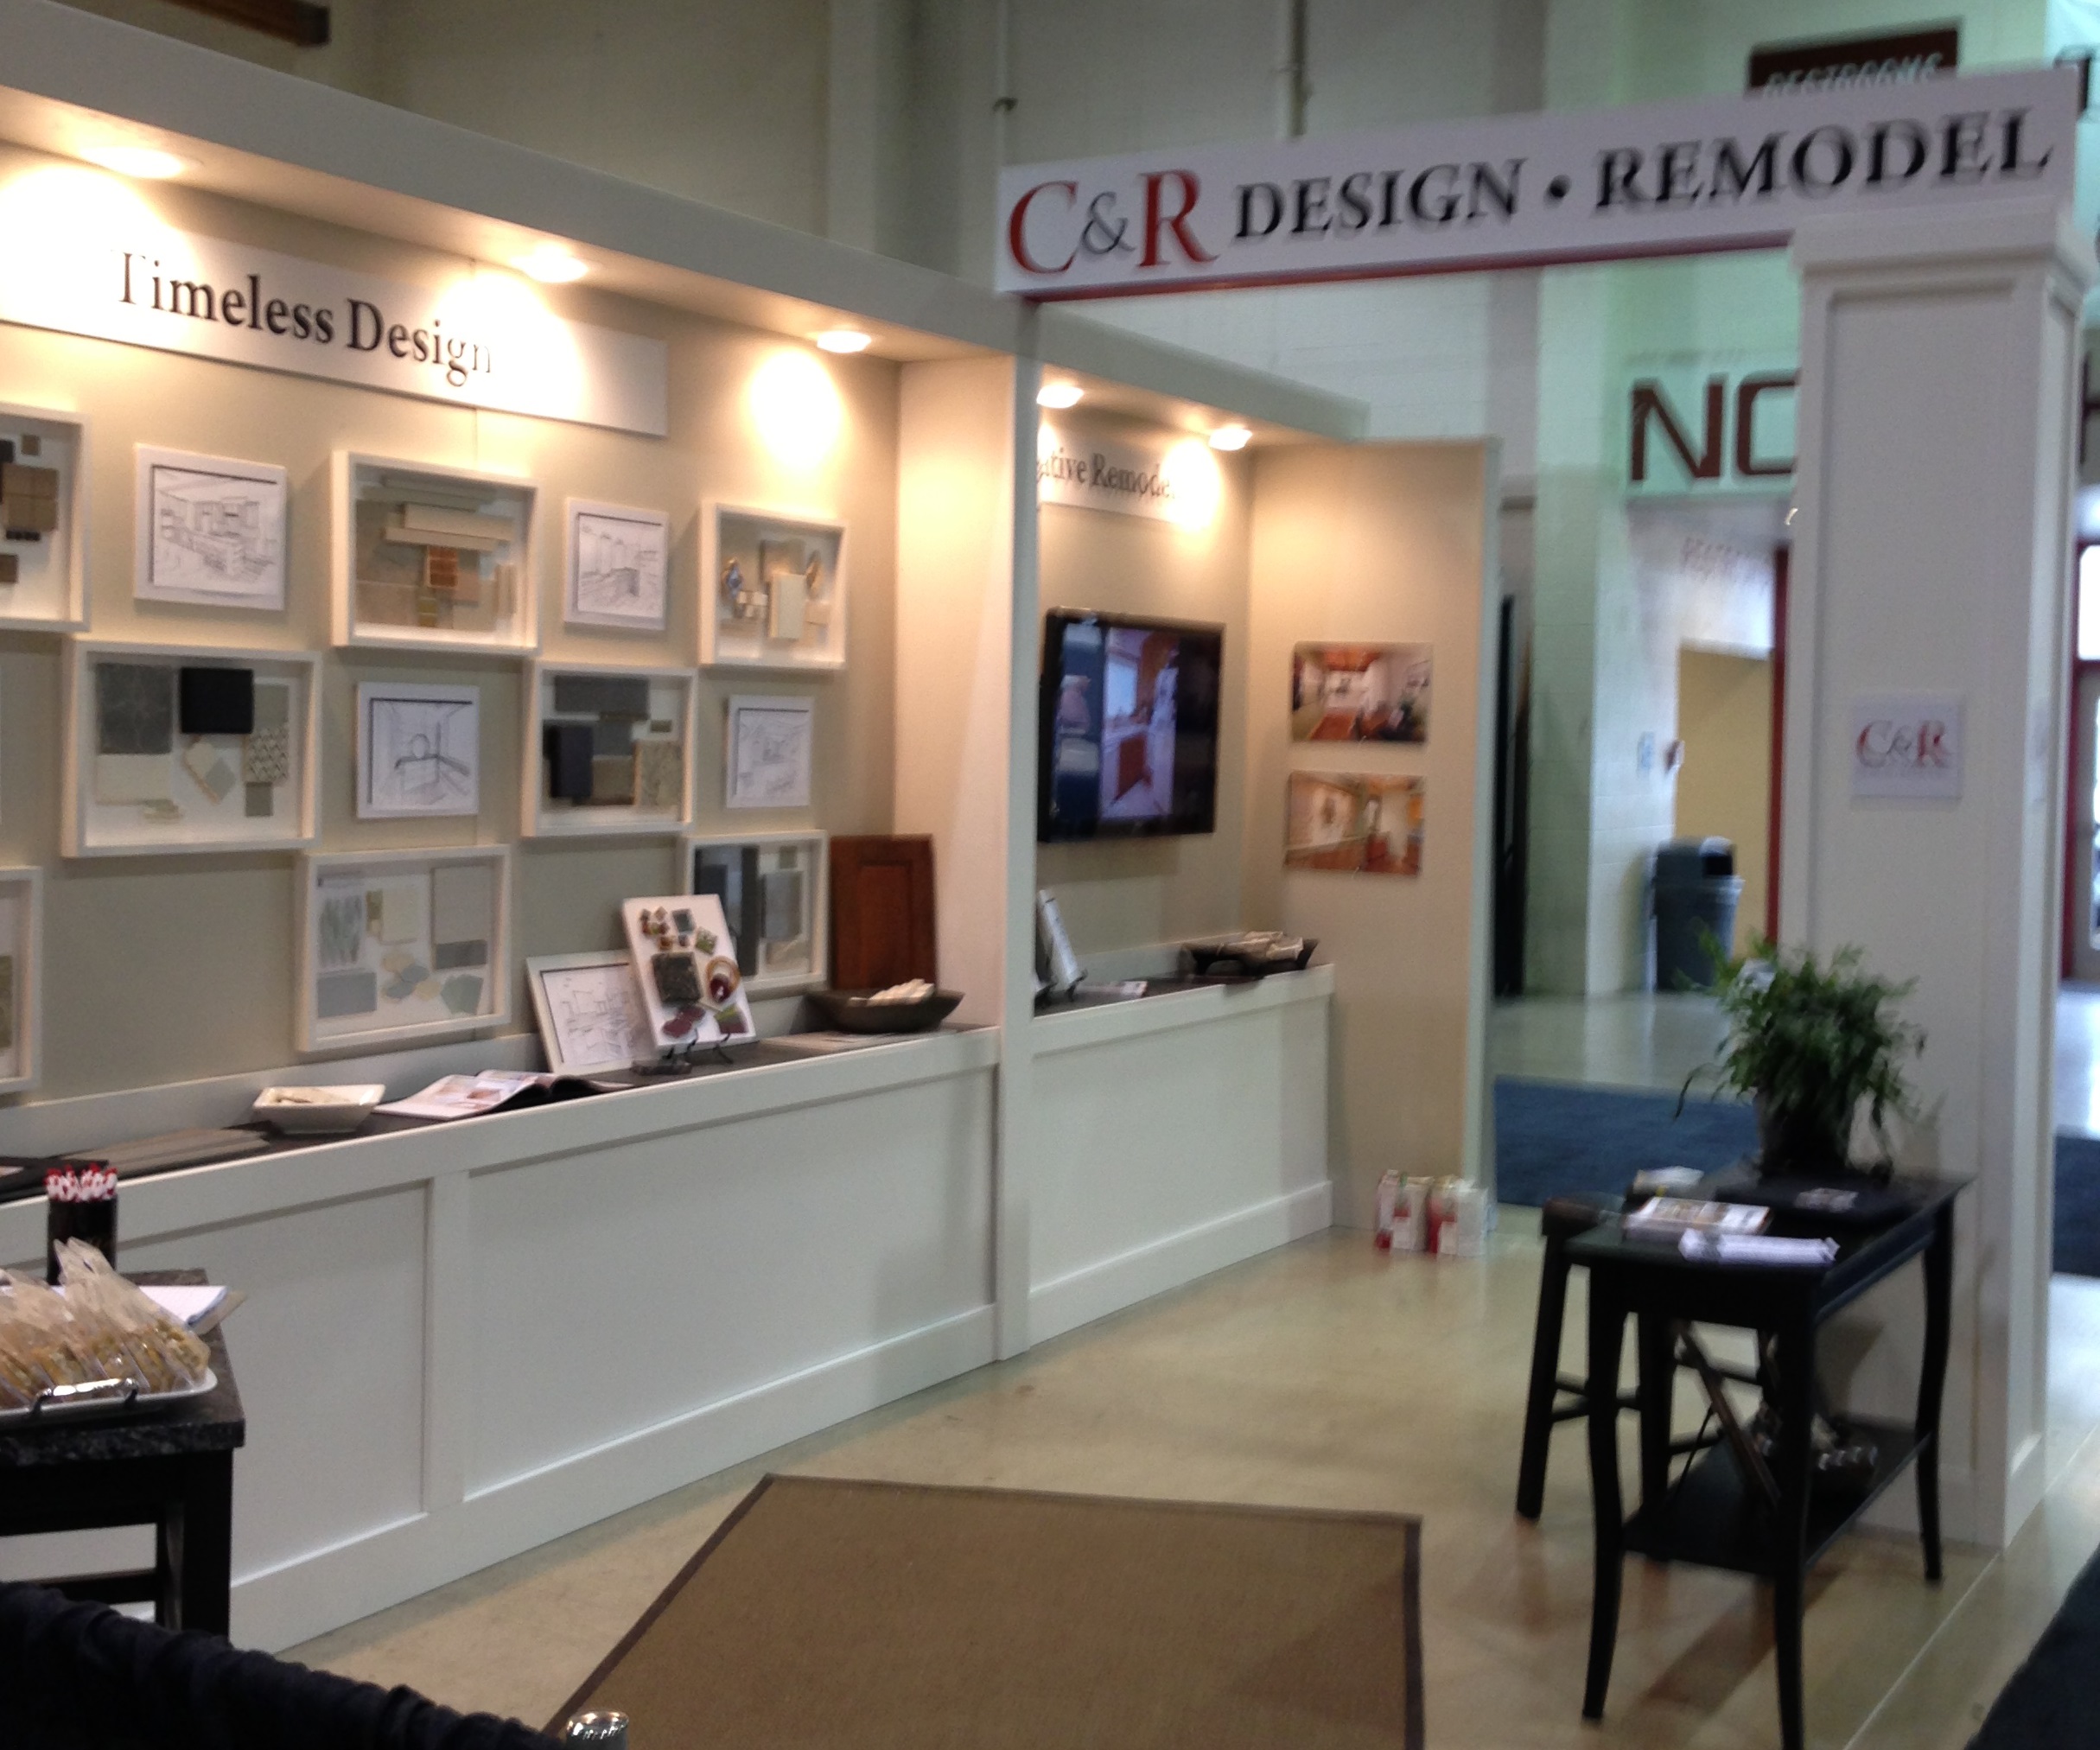 2014 Mid-Valley Home Show in Salem, Oregon